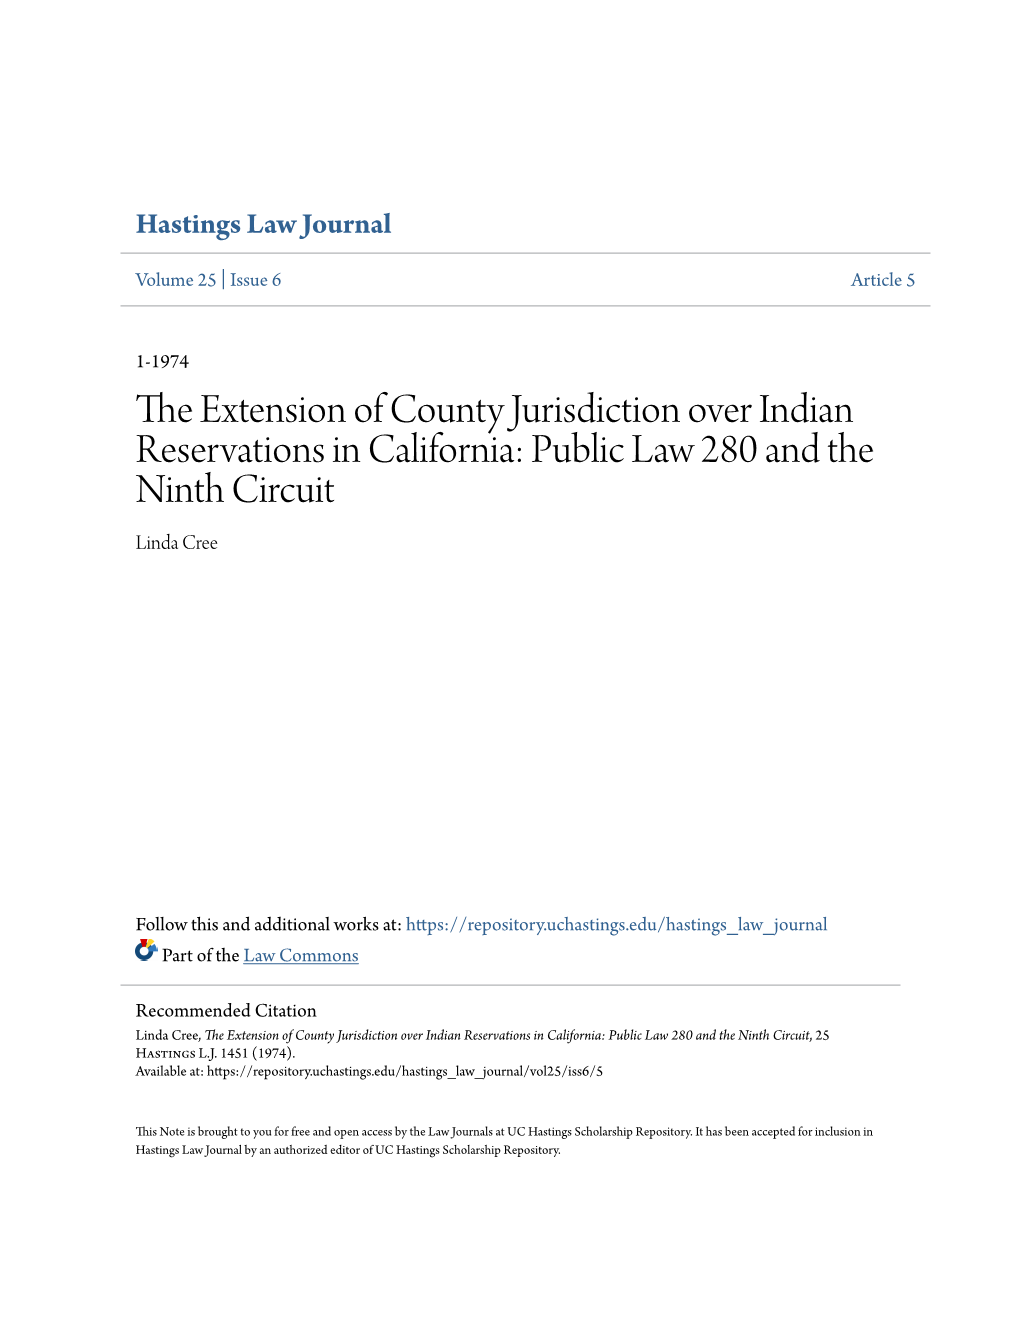 The Extension of County Jurisdiction Over Indian Reservations in California: Public Law 280 and the Ninth Circuit Linda Cree